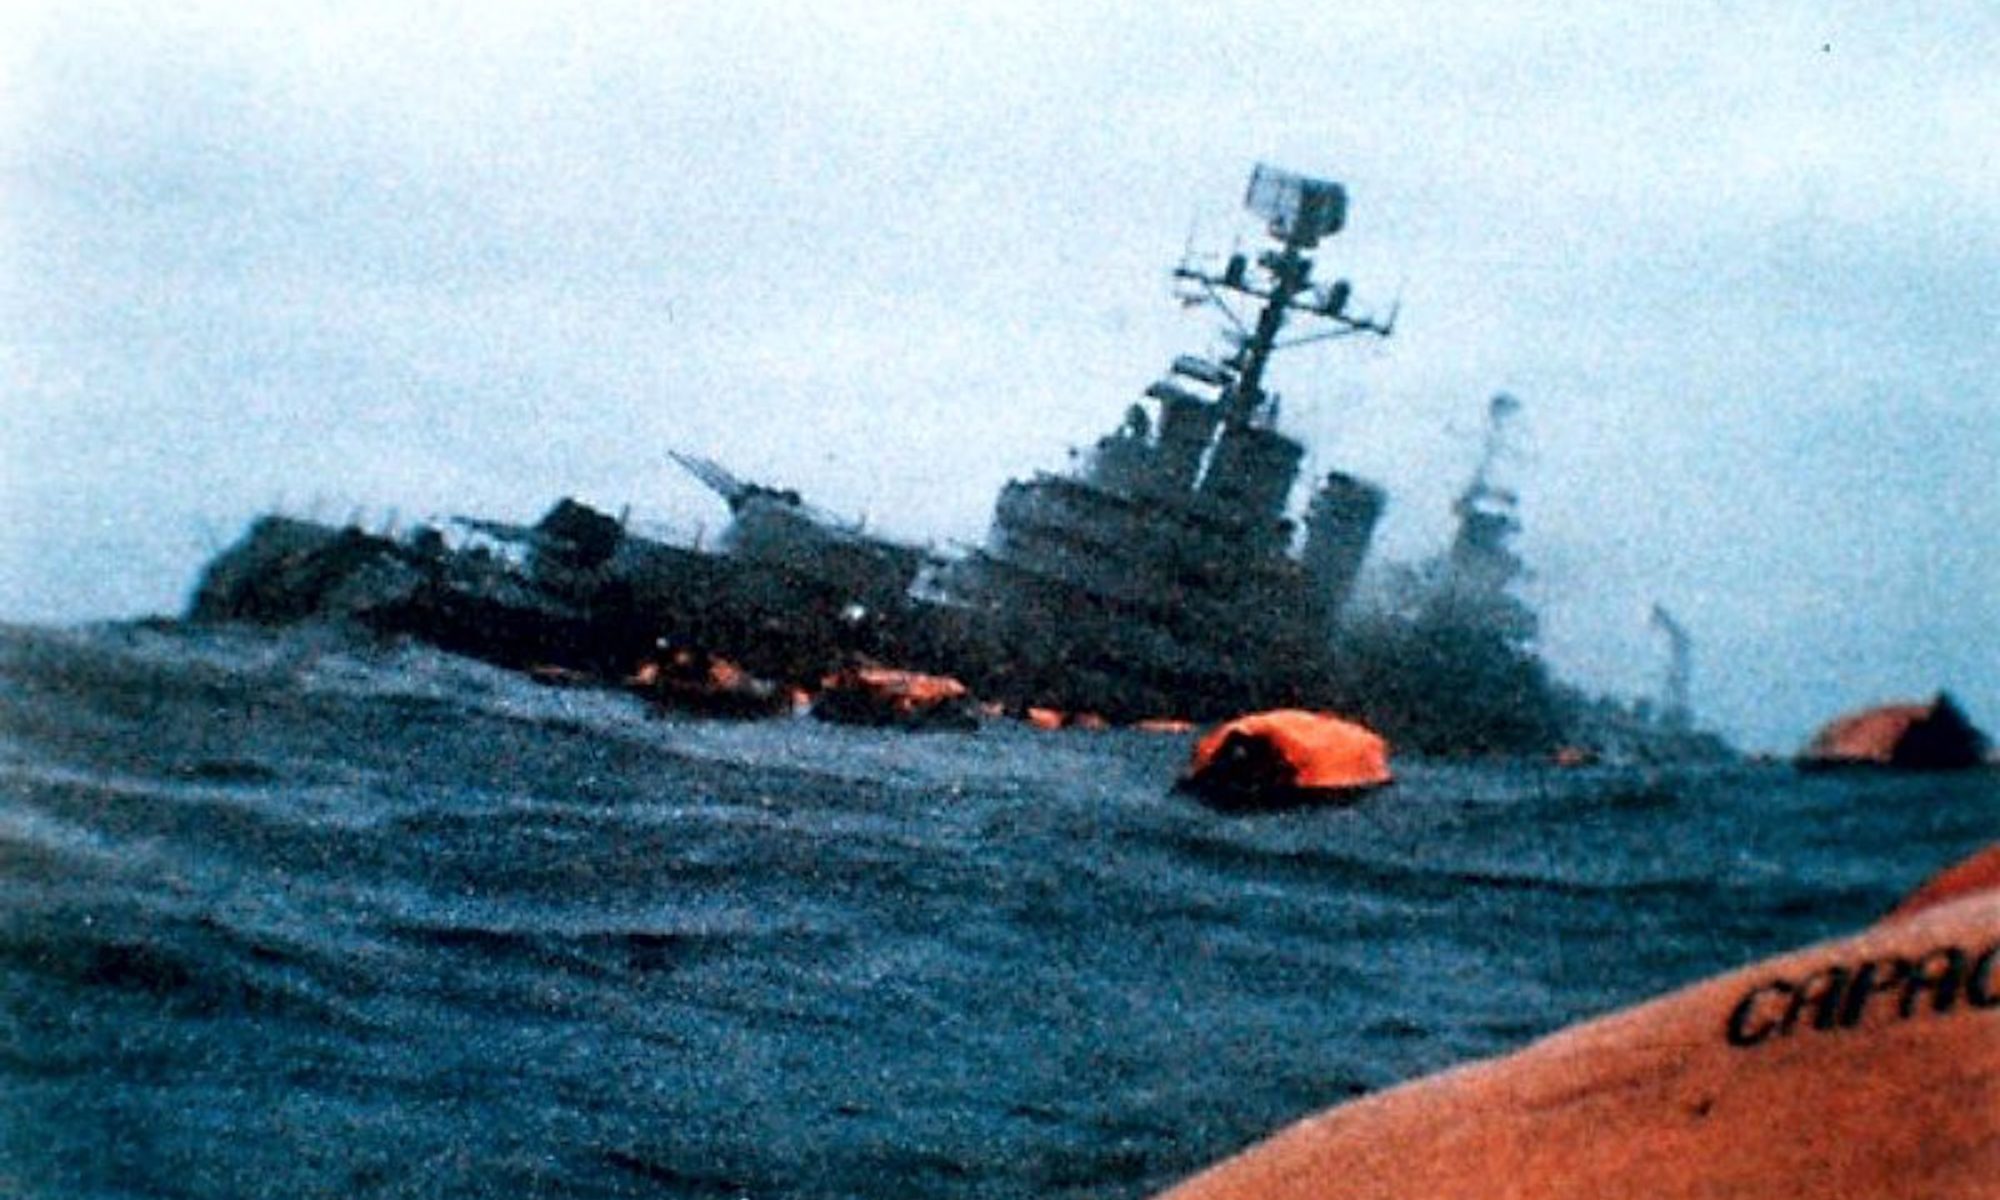 Color photo of a cruiser sinking with ocean in foreground and orange lifeboats on the water.